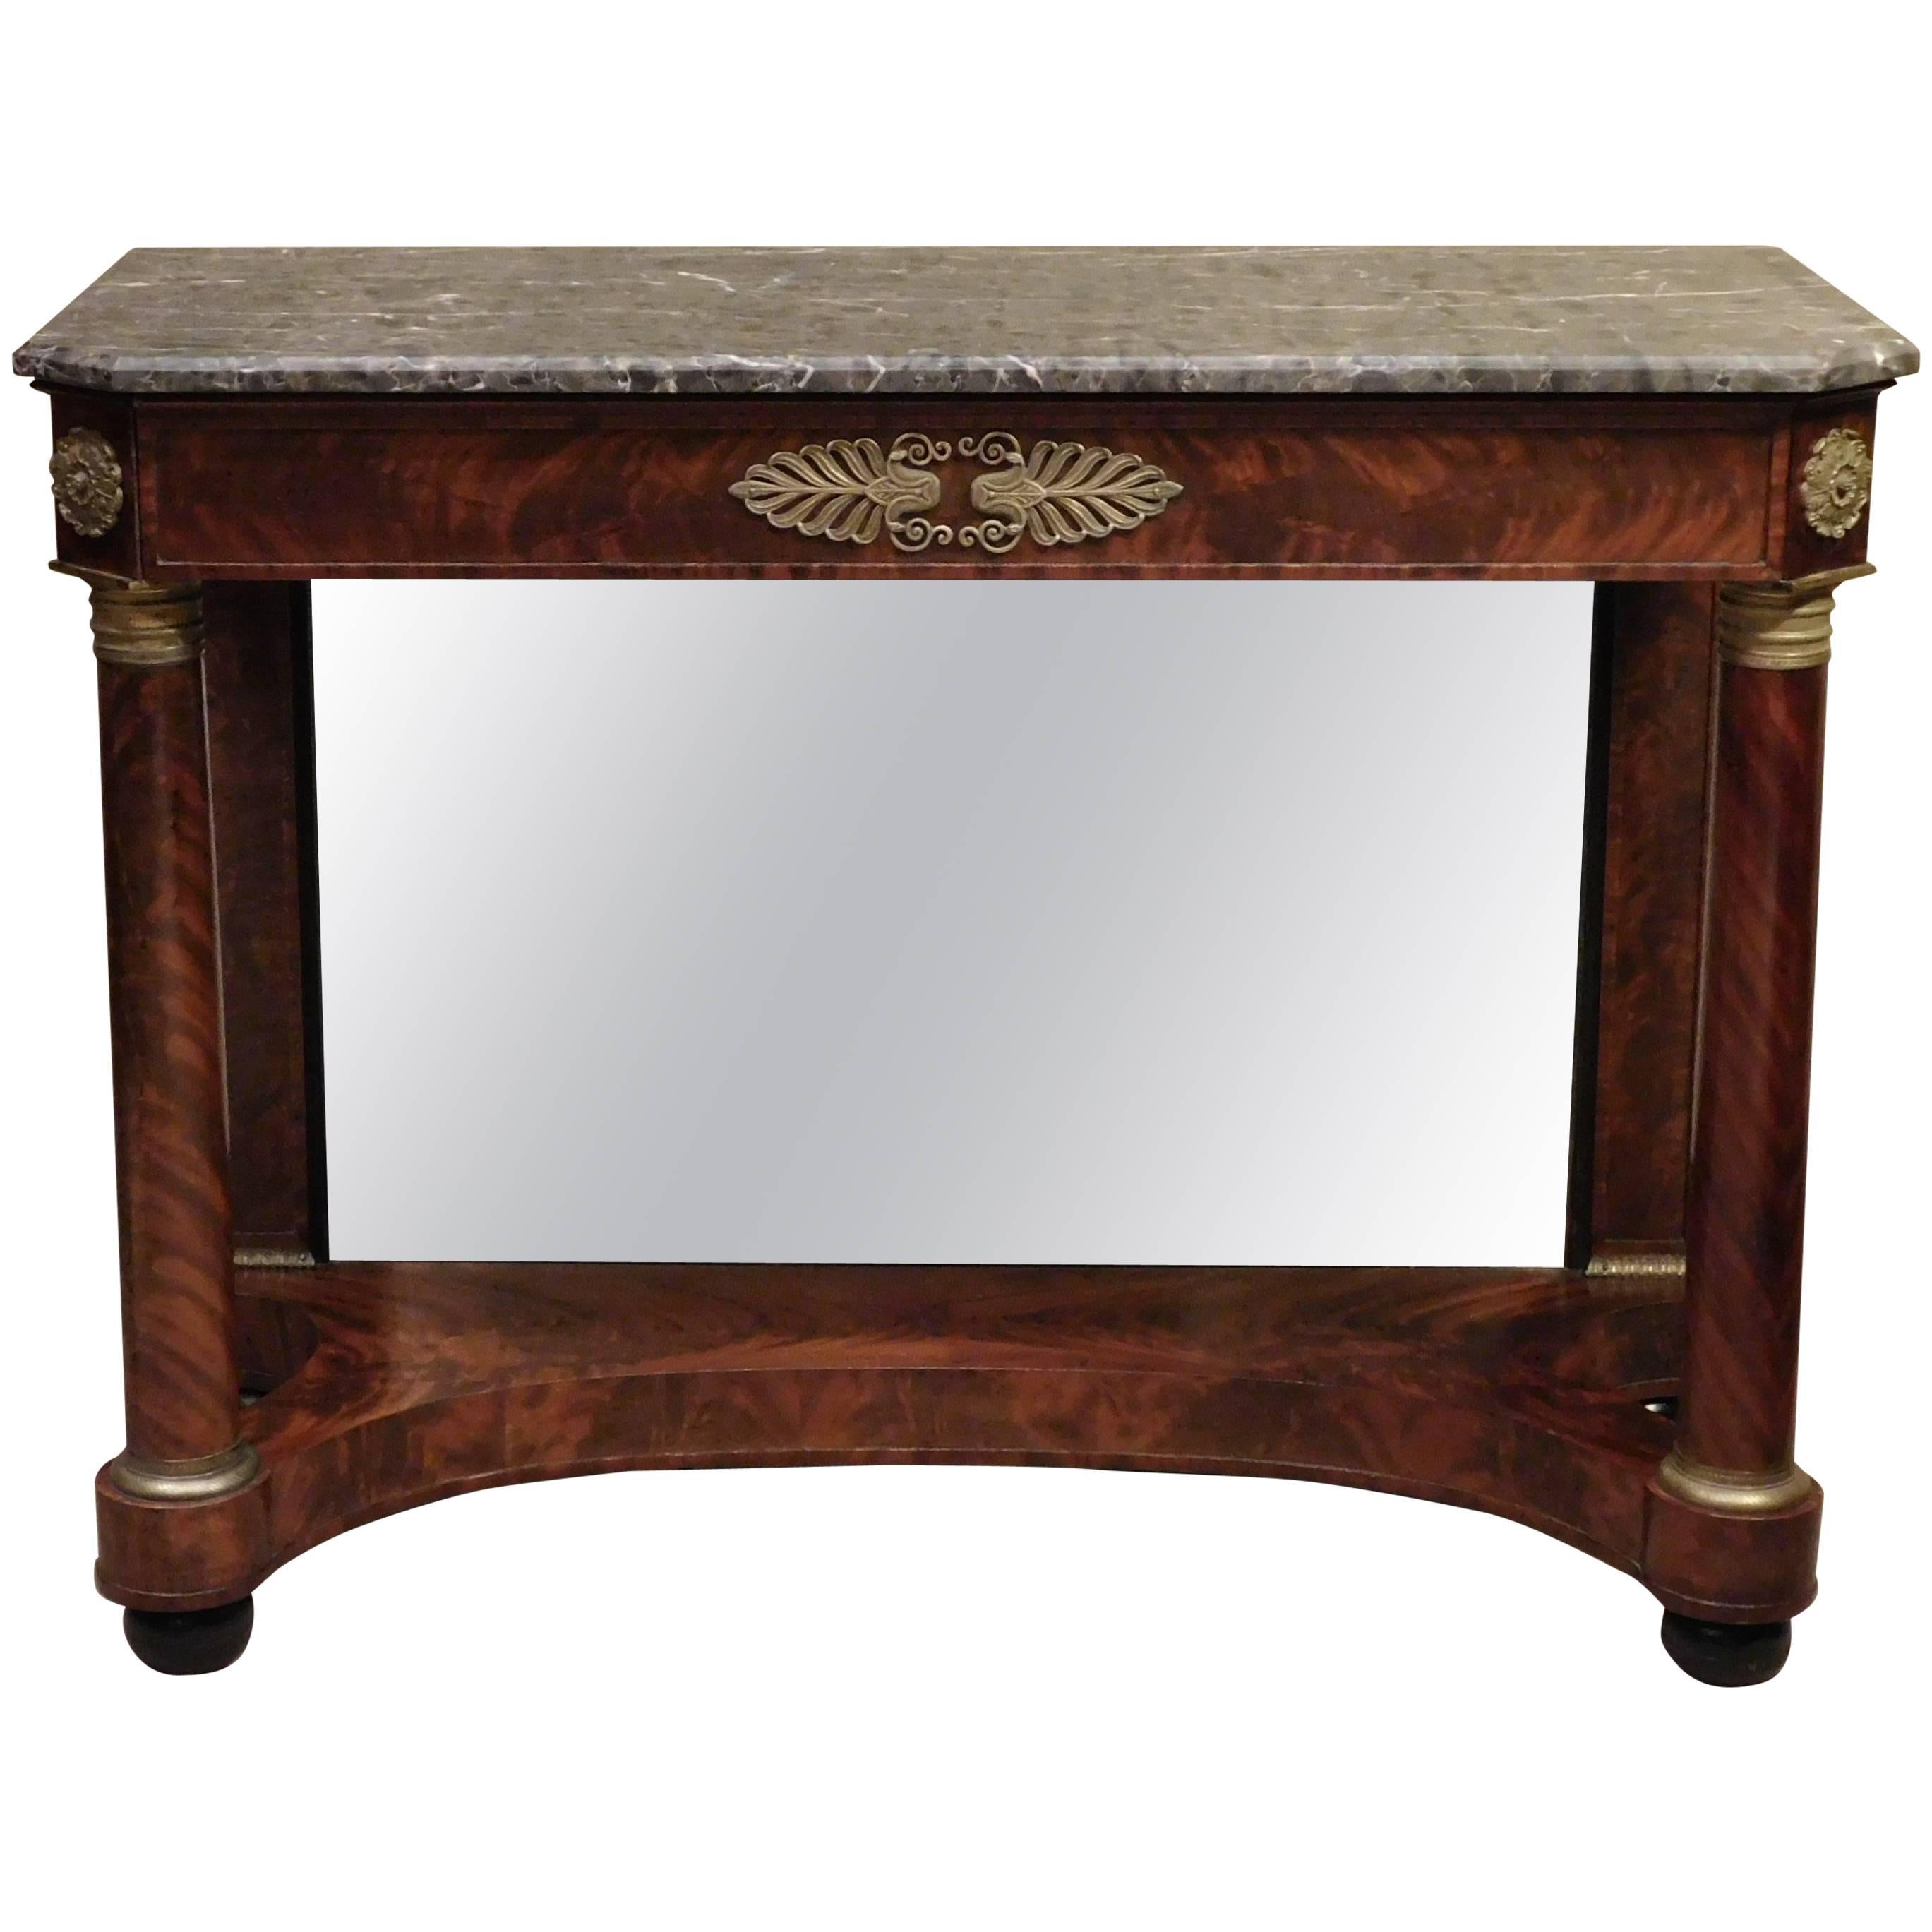 Napoleon III Marble-Top Empire Style Console, France, circa 1870 For Sale